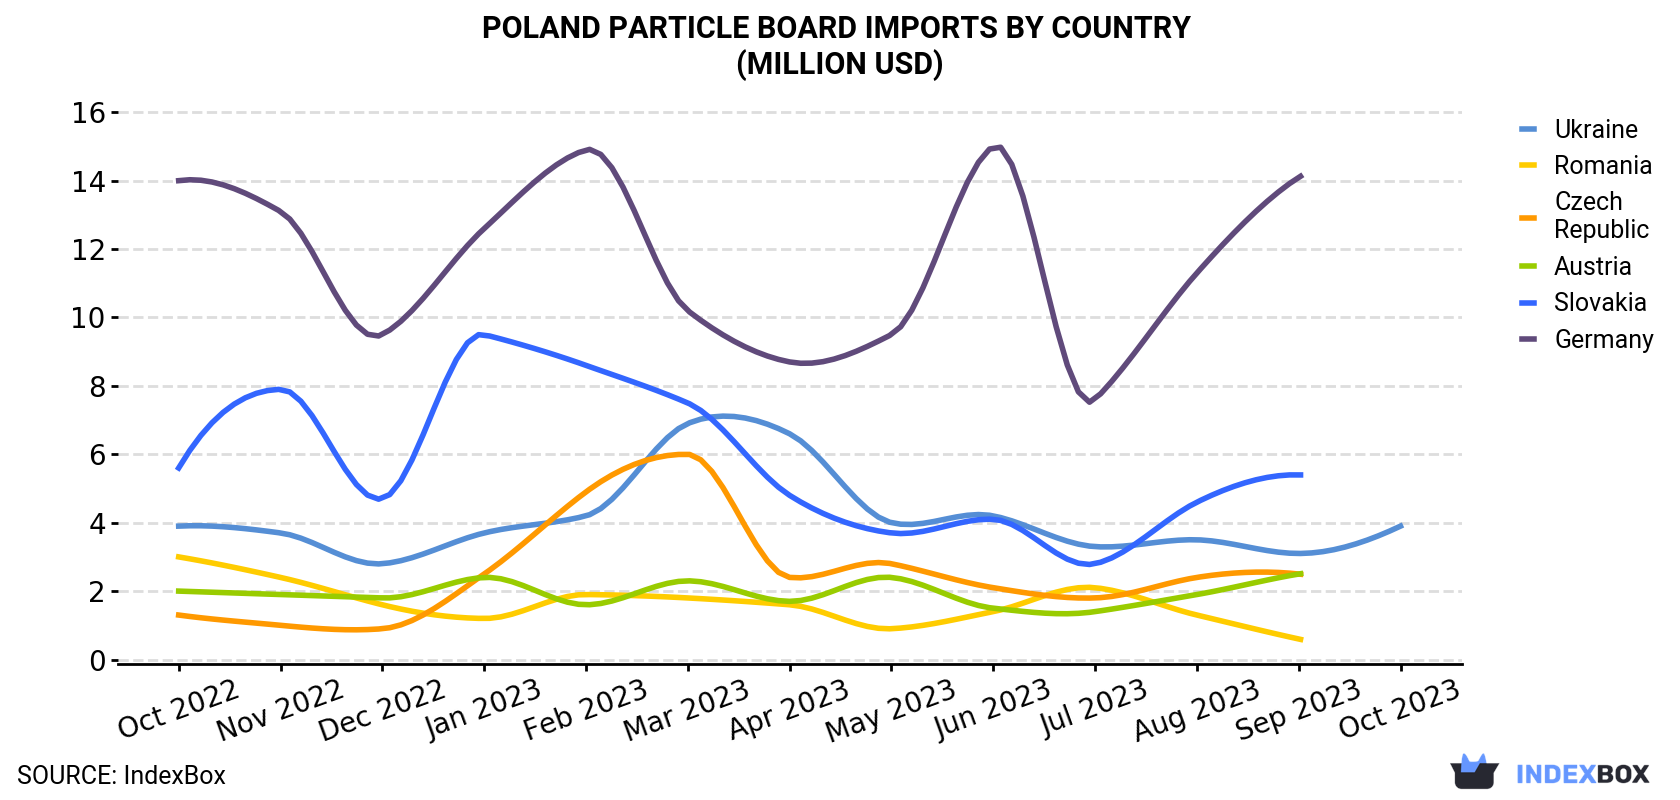 Poland Particle Board Imports By Country (Million USD)